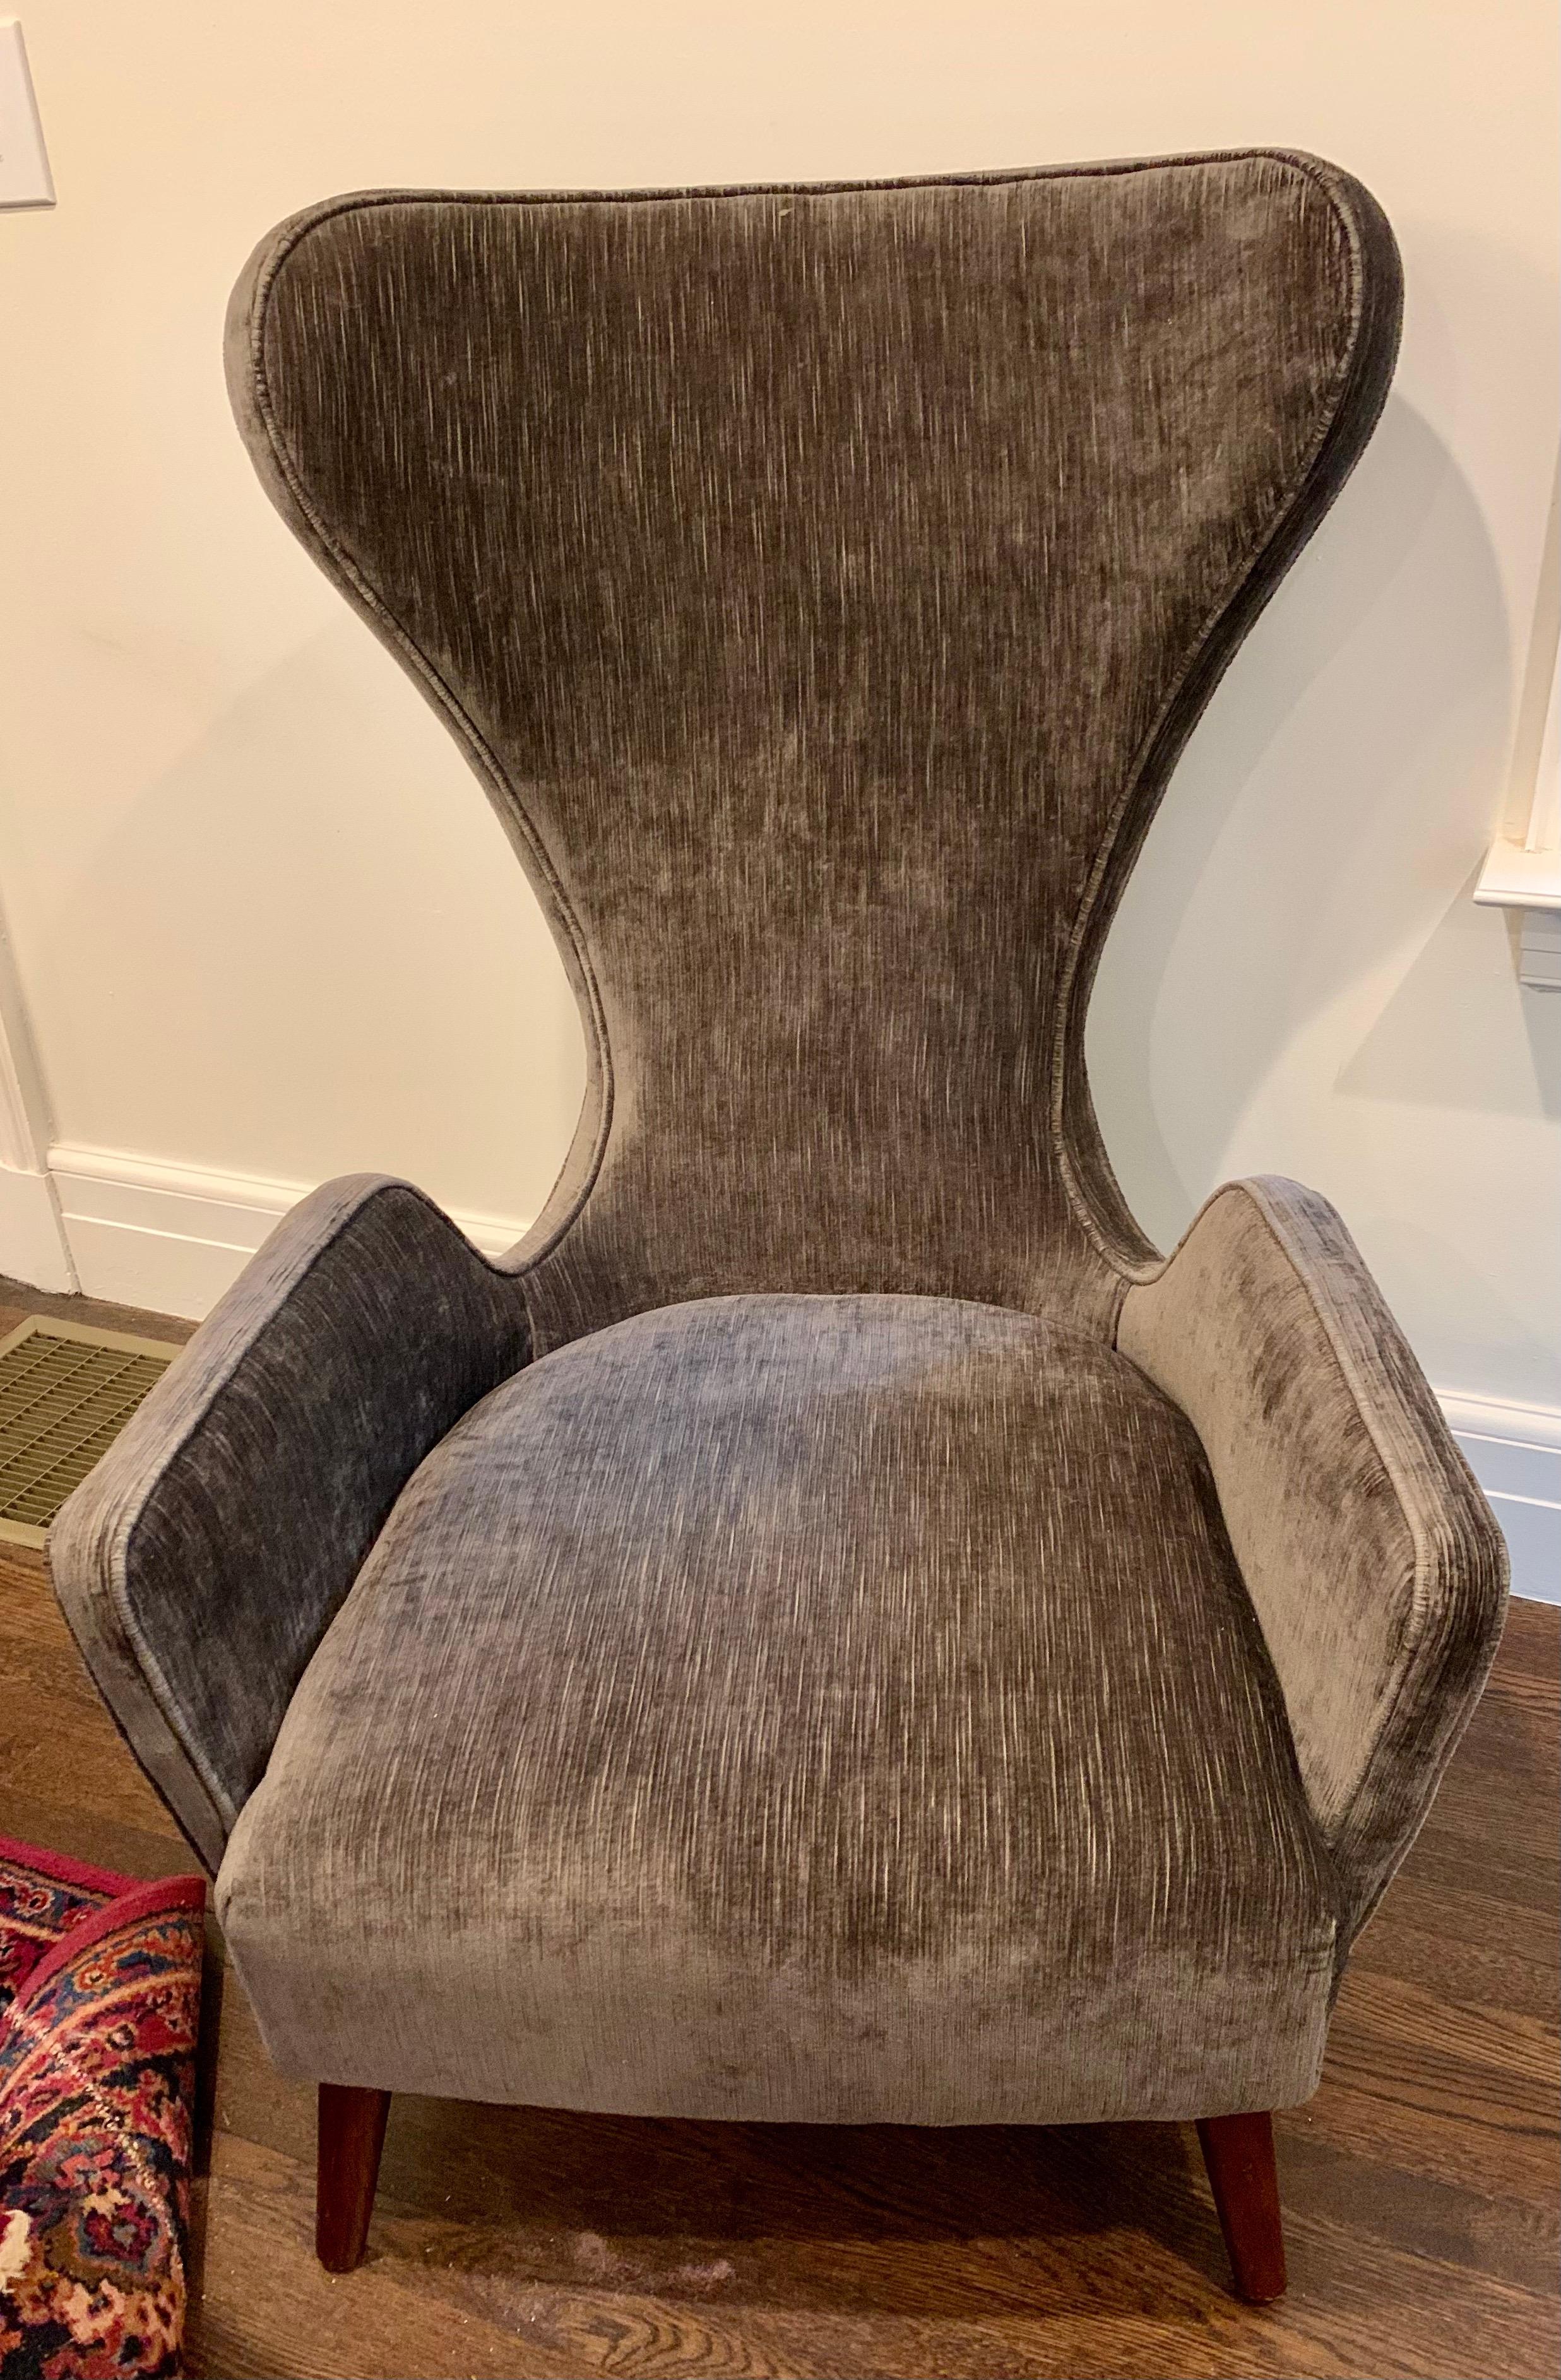 Stunning pair of sculptural mid century wing chairs with coveted curved back and lines to die for. The last two we will be selling this week exclusively on 1stDibs. Note fabric is almost brand new, less than 3 months old. See pics for color. Now,